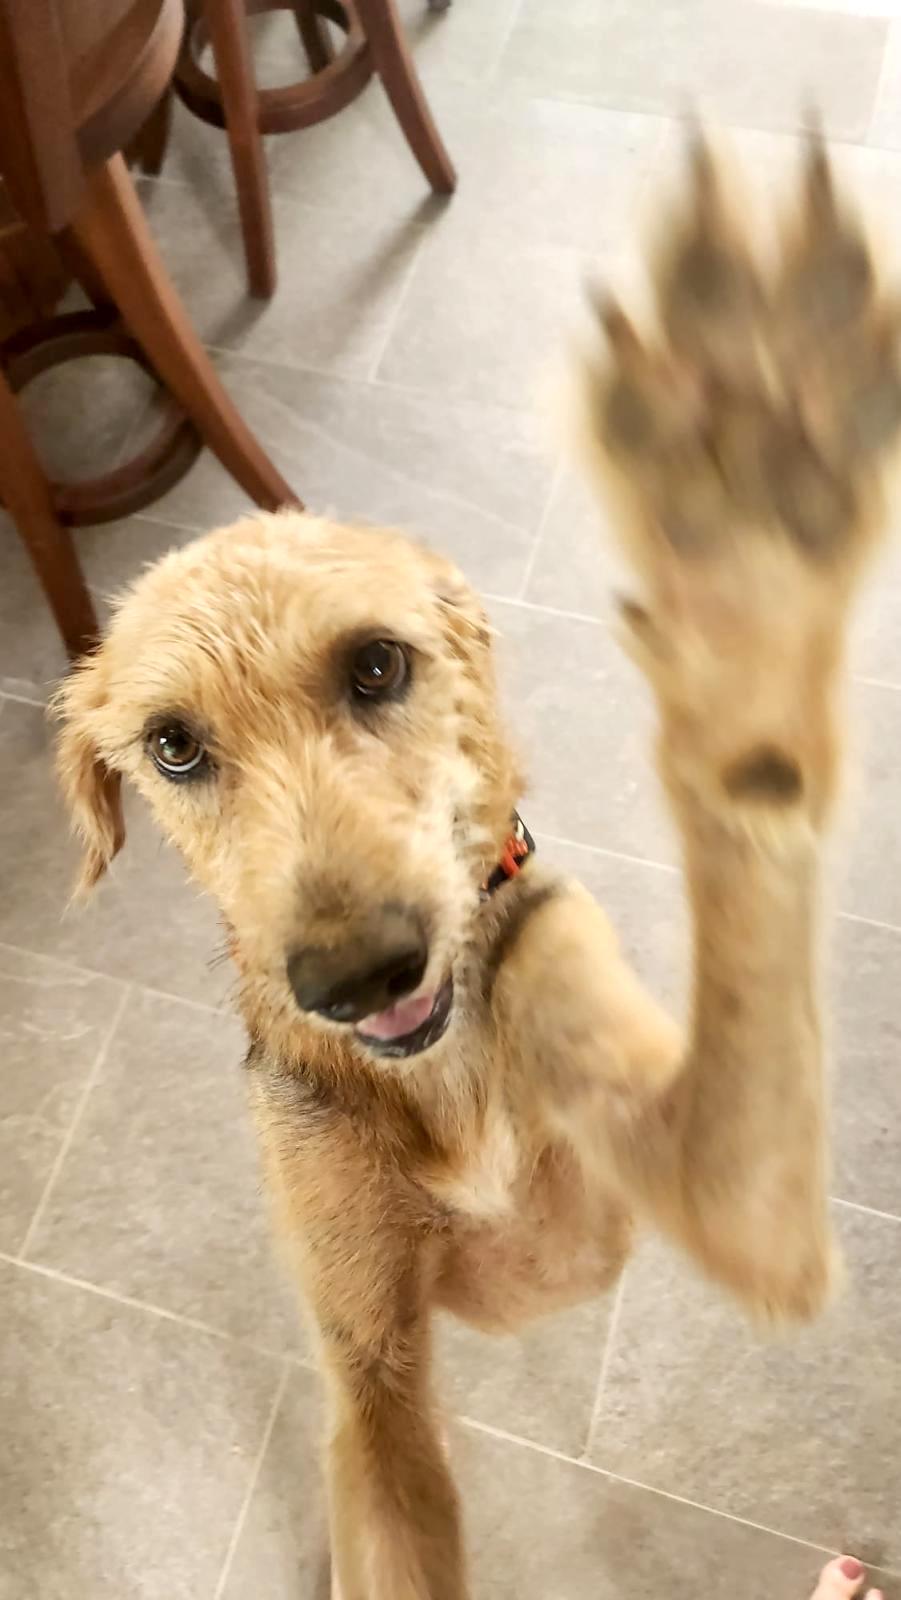 Fluffy blond dog giving a high five!